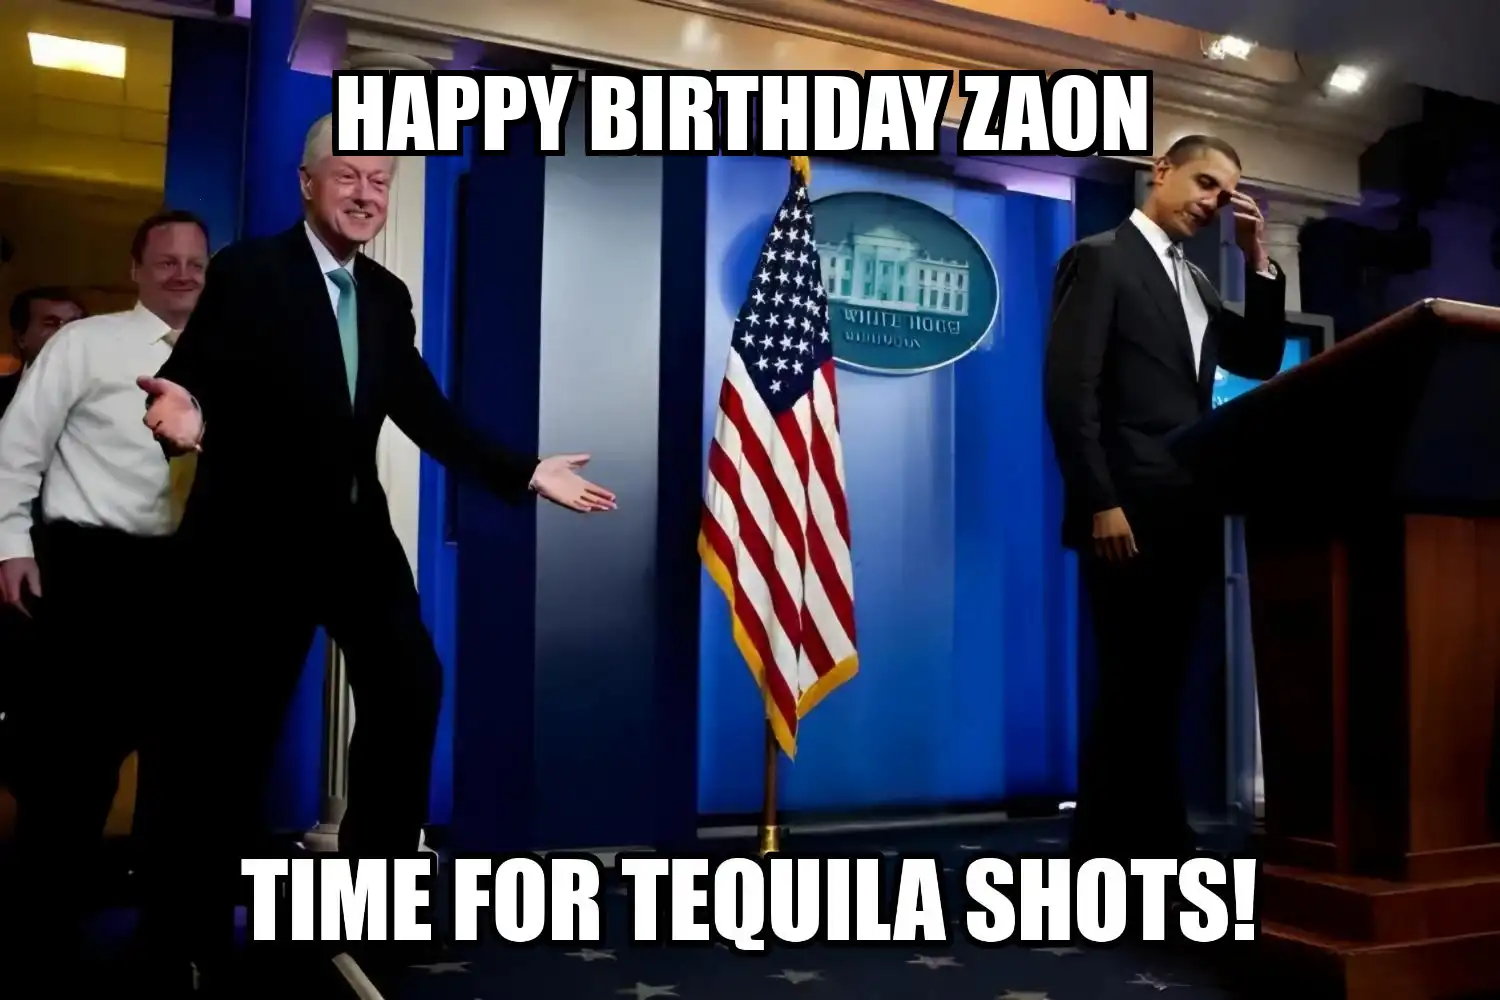 Happy Birthday Zaon Time For Tequila Shots Memes